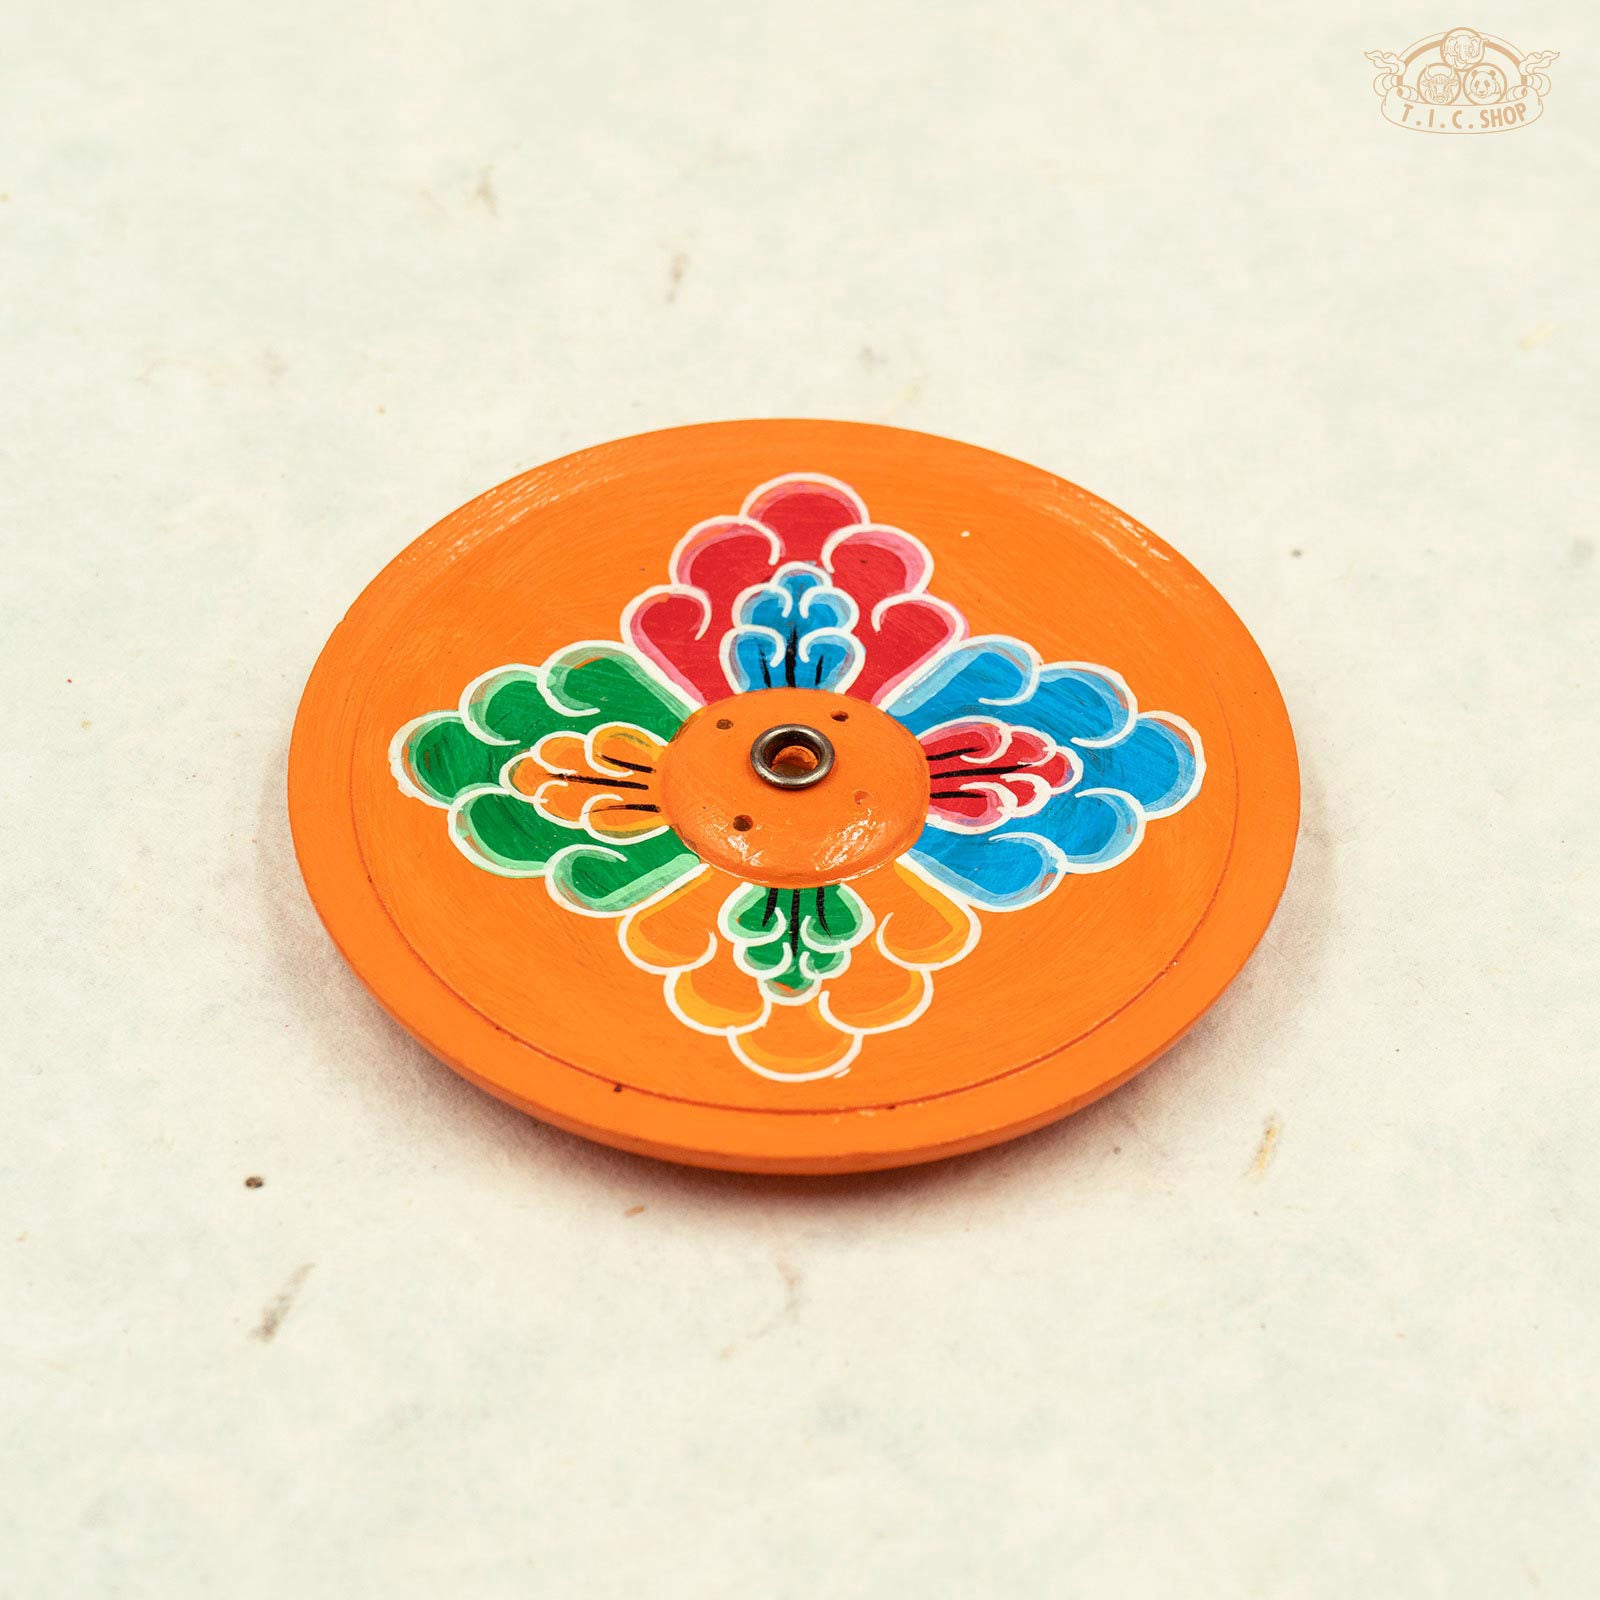 Lotus Flower Hand-painted Wooden Plate Incense Holder